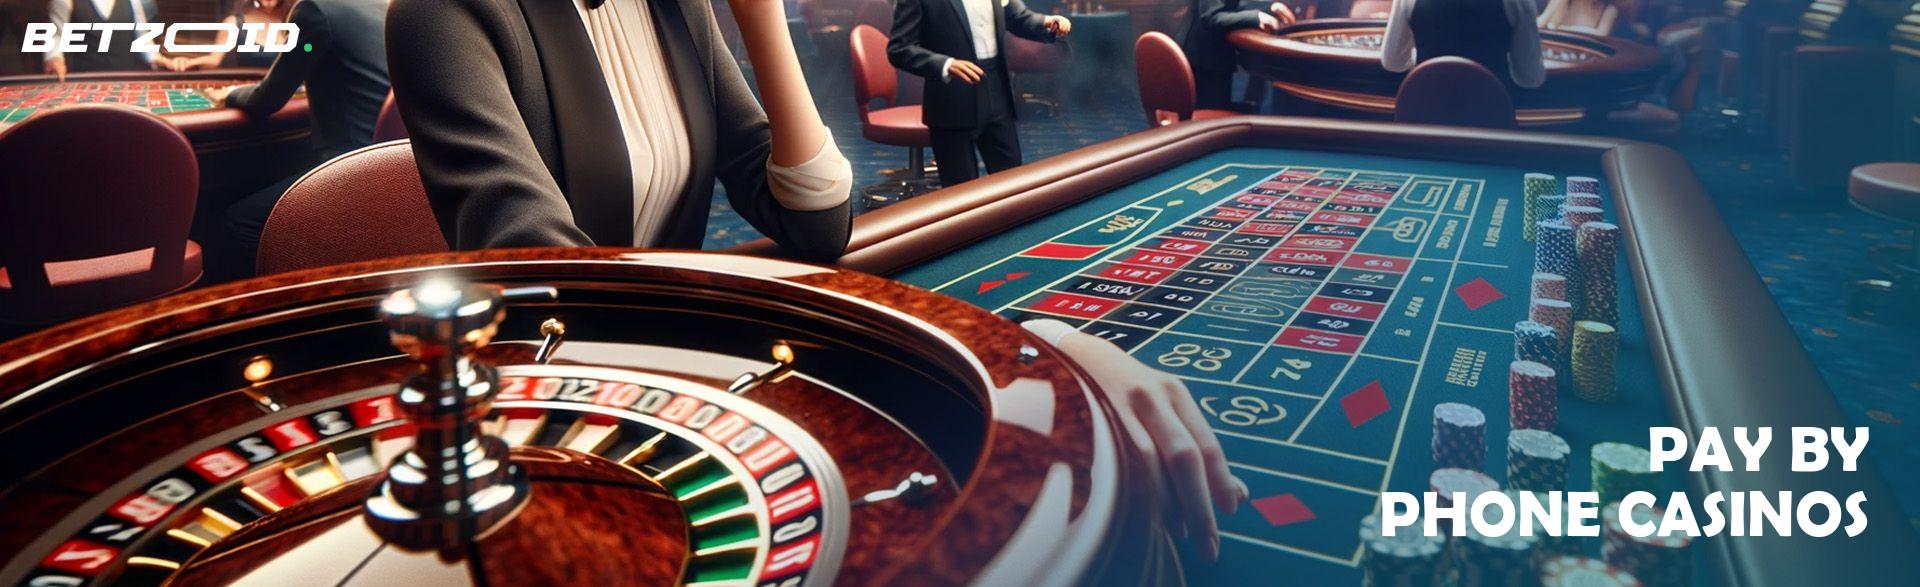 Pay By Phone Casinos.